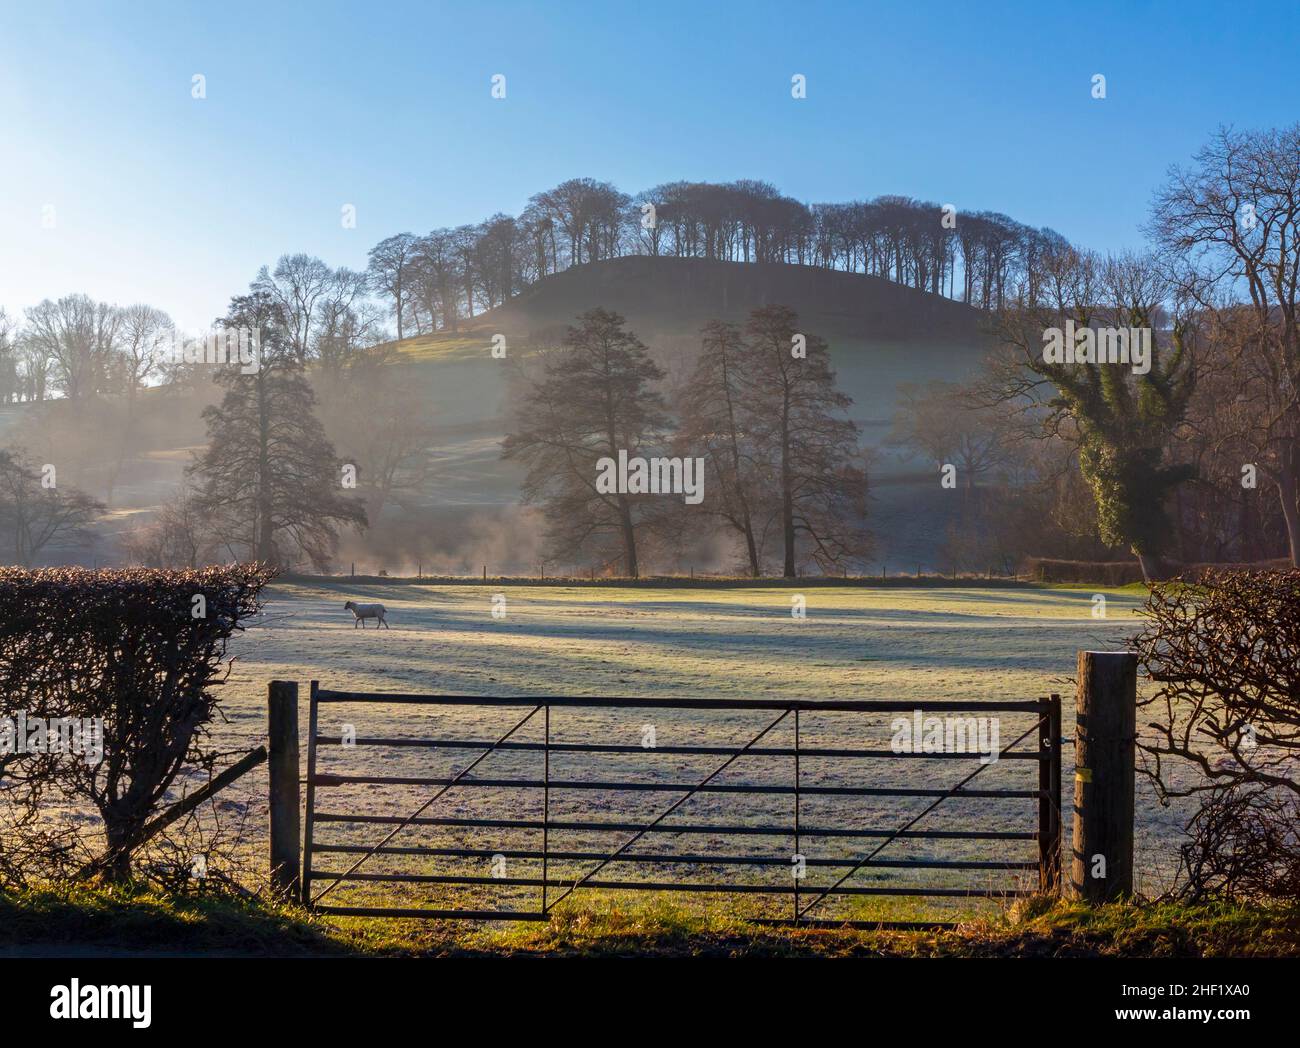 Frost covered landscape with gate and trees at Rowsley in the Derbyshire Peak District England UK with Peak Tor or Pillow Hill in the distance. Stock Photo